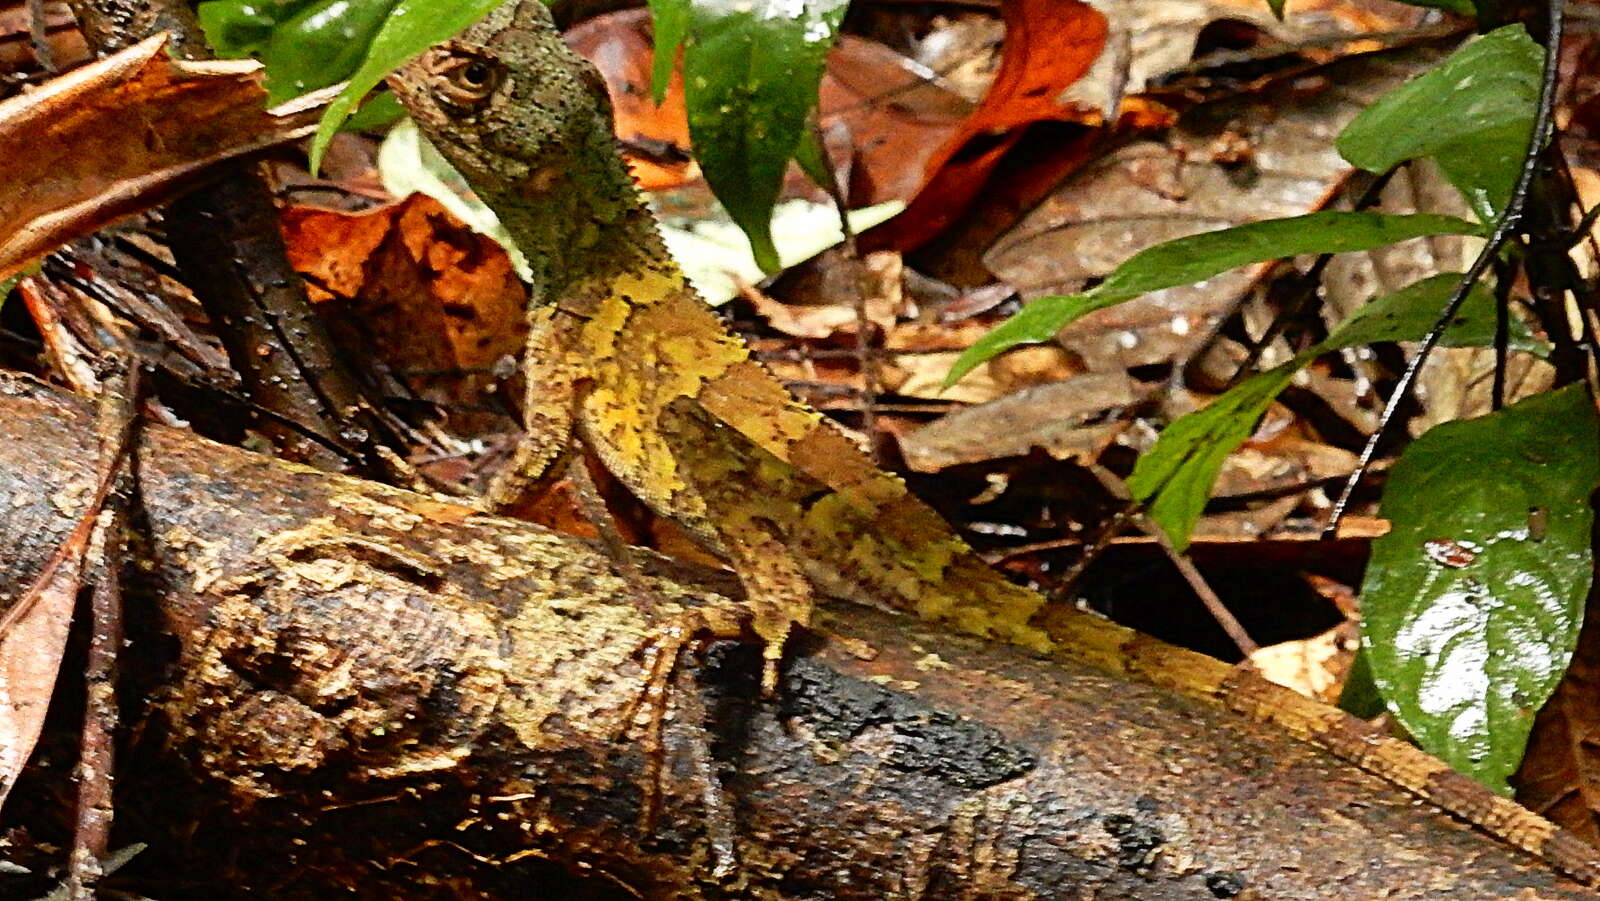 Image of Wied's Fathead Anole